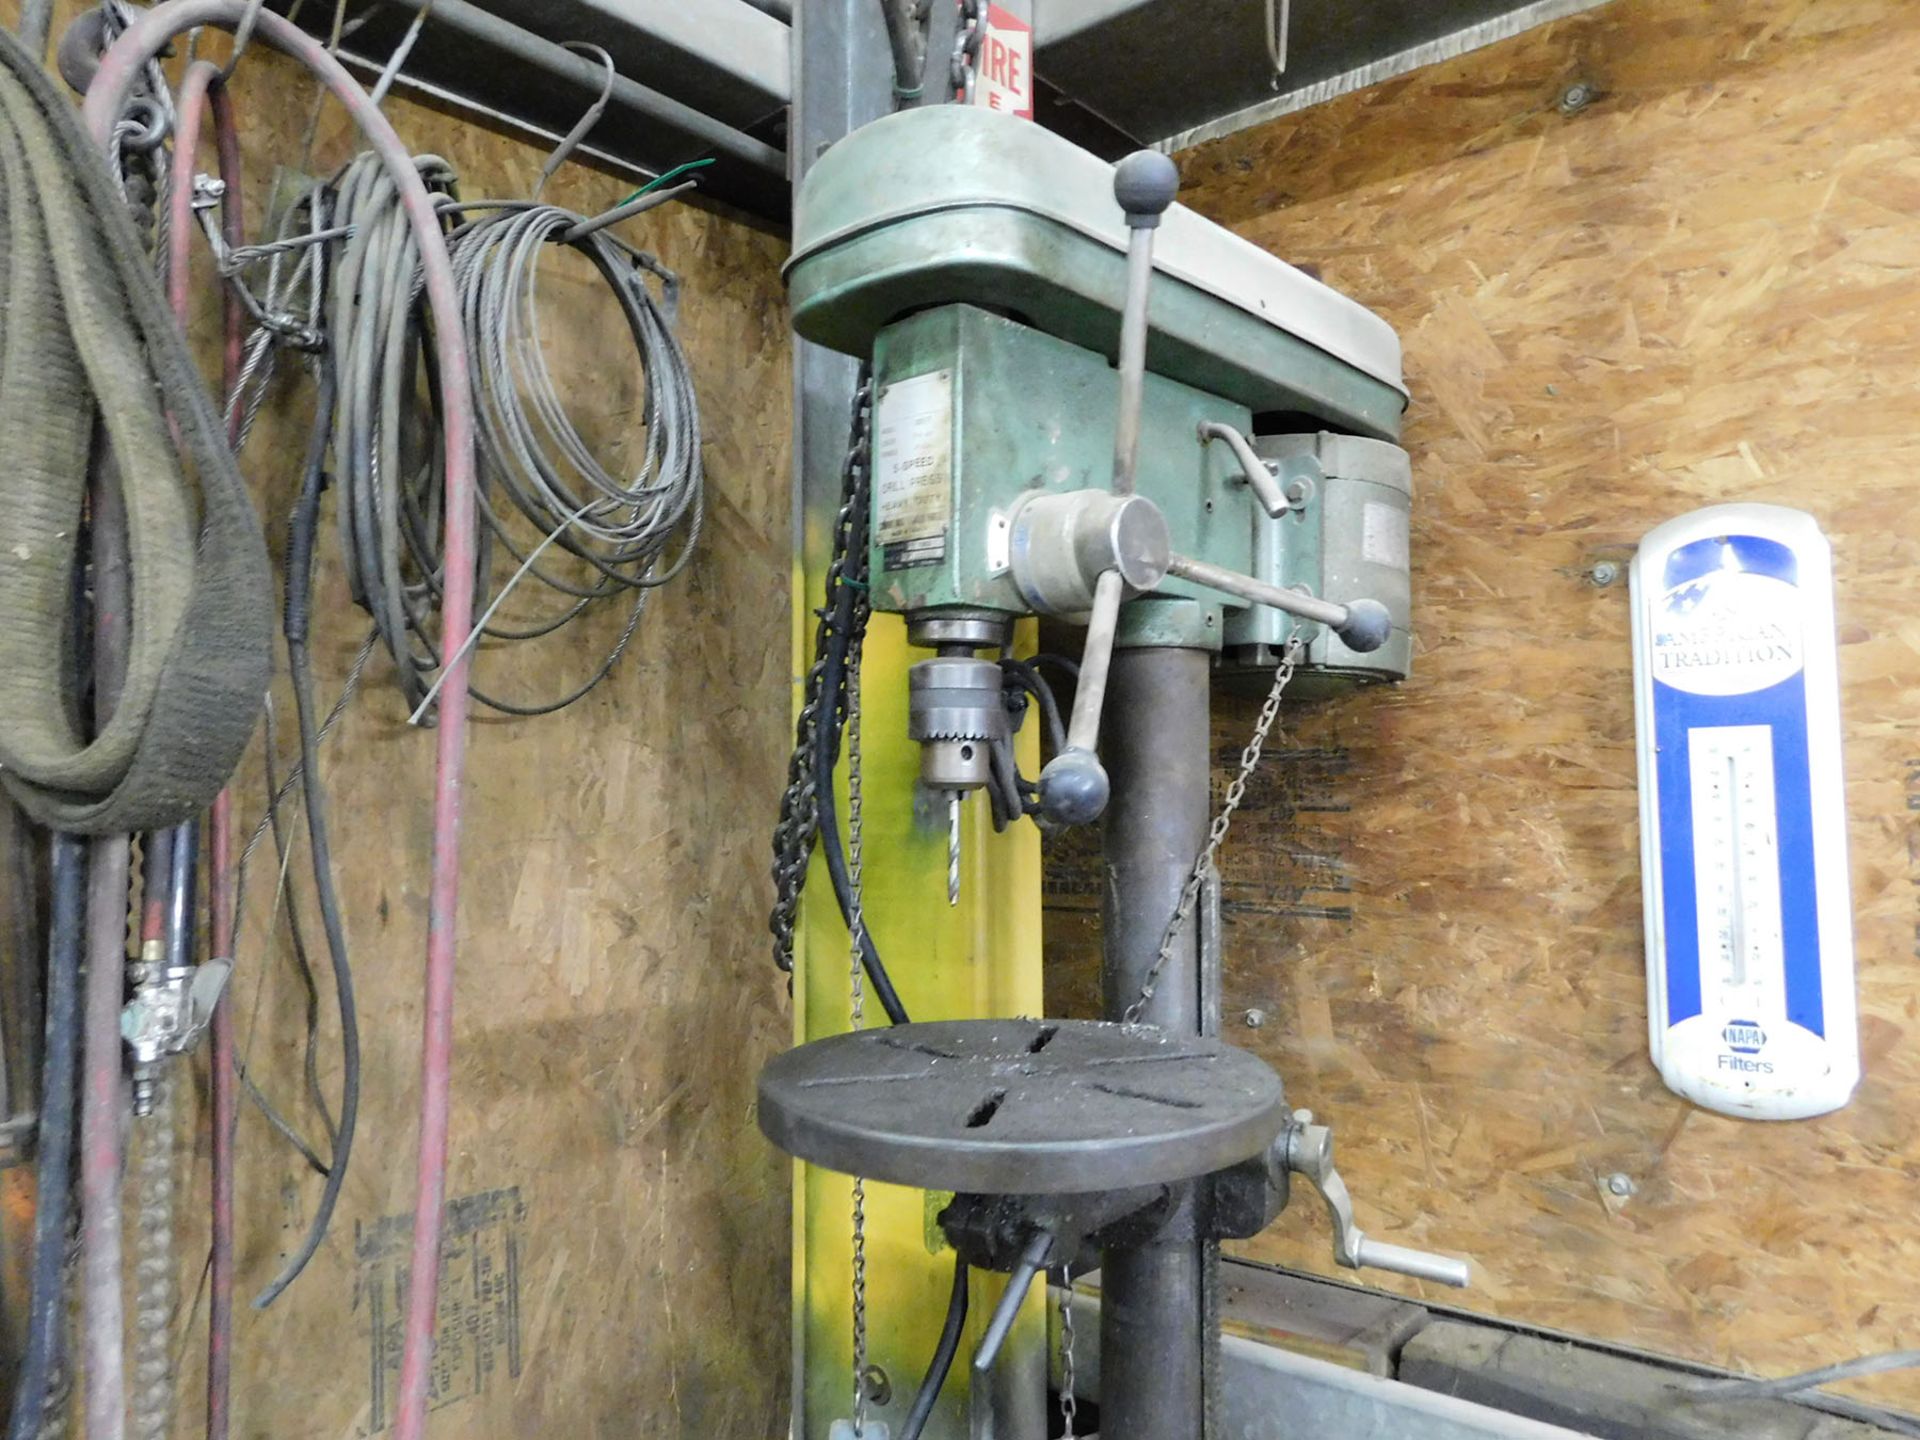 DRILL PRESS; MODEL 0017, CHUCK 5/8'', SPINDLE JT #3, 5-SPEED, S/N 032277